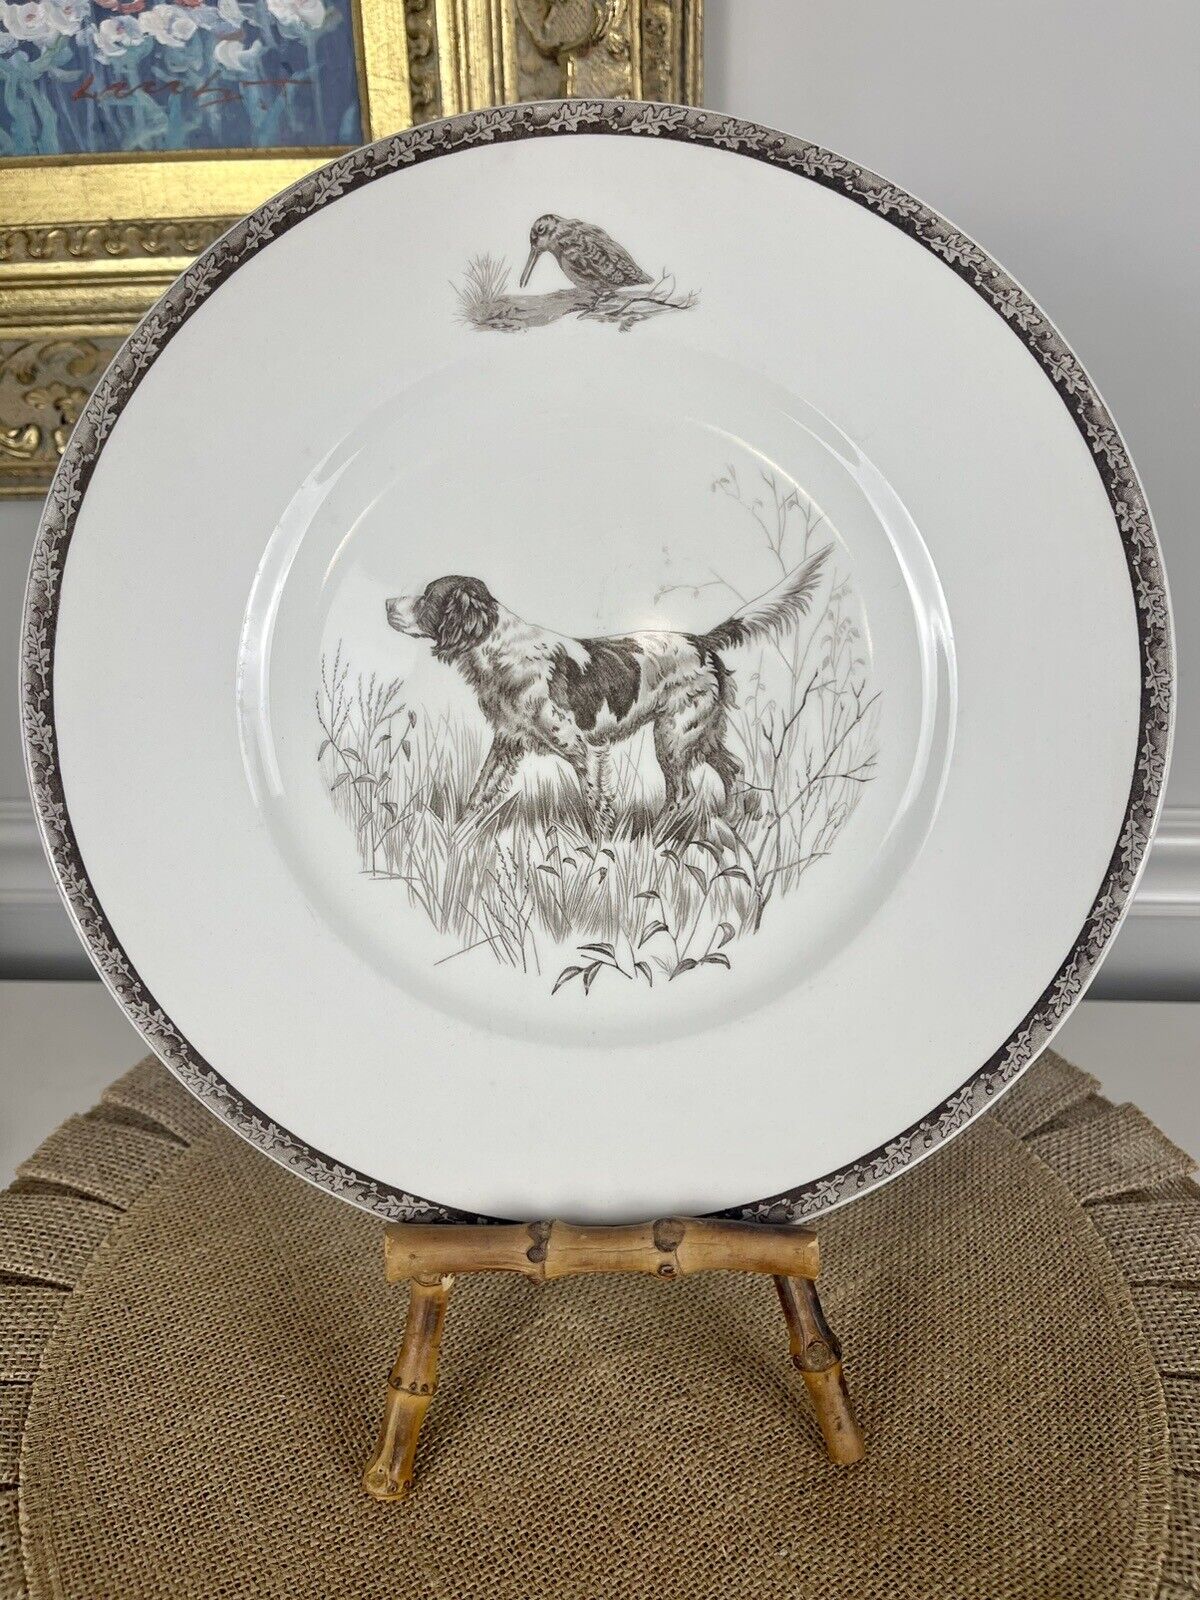 Marguerite Kirmse American Sporting Dog Plate by WEDGWOOD English Setter